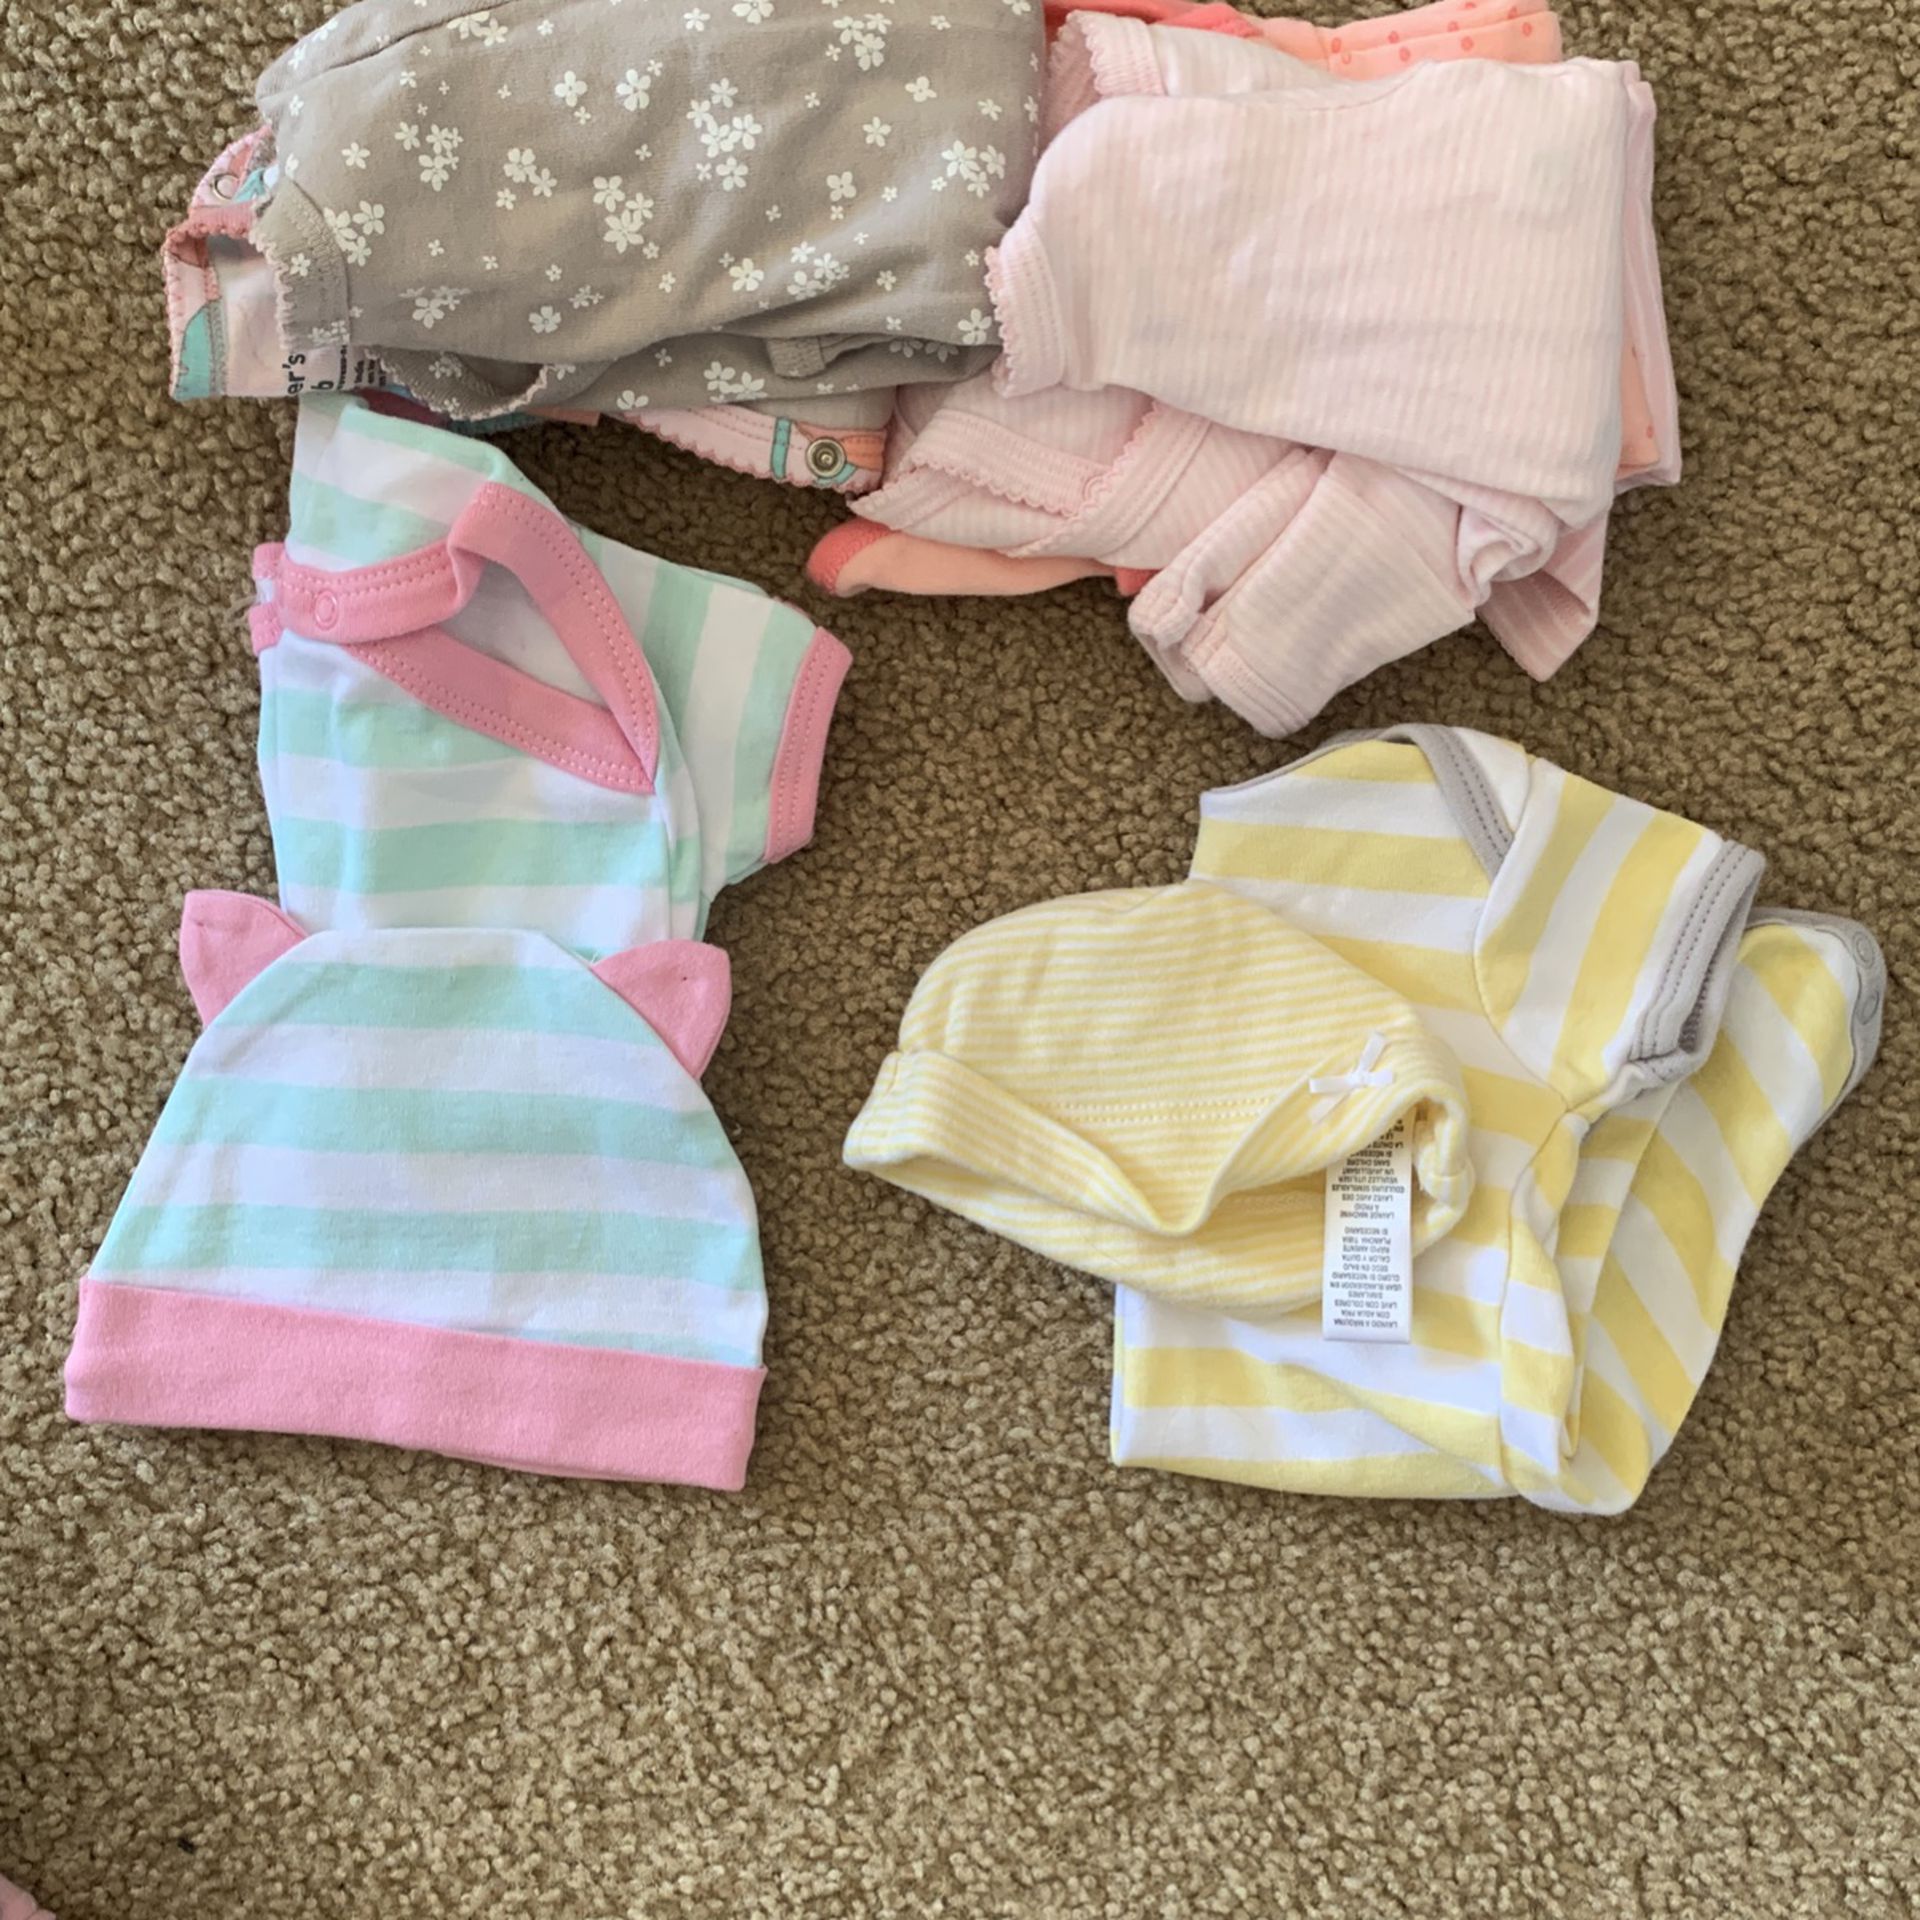 About 20 Newborn To 3 Month Onesies